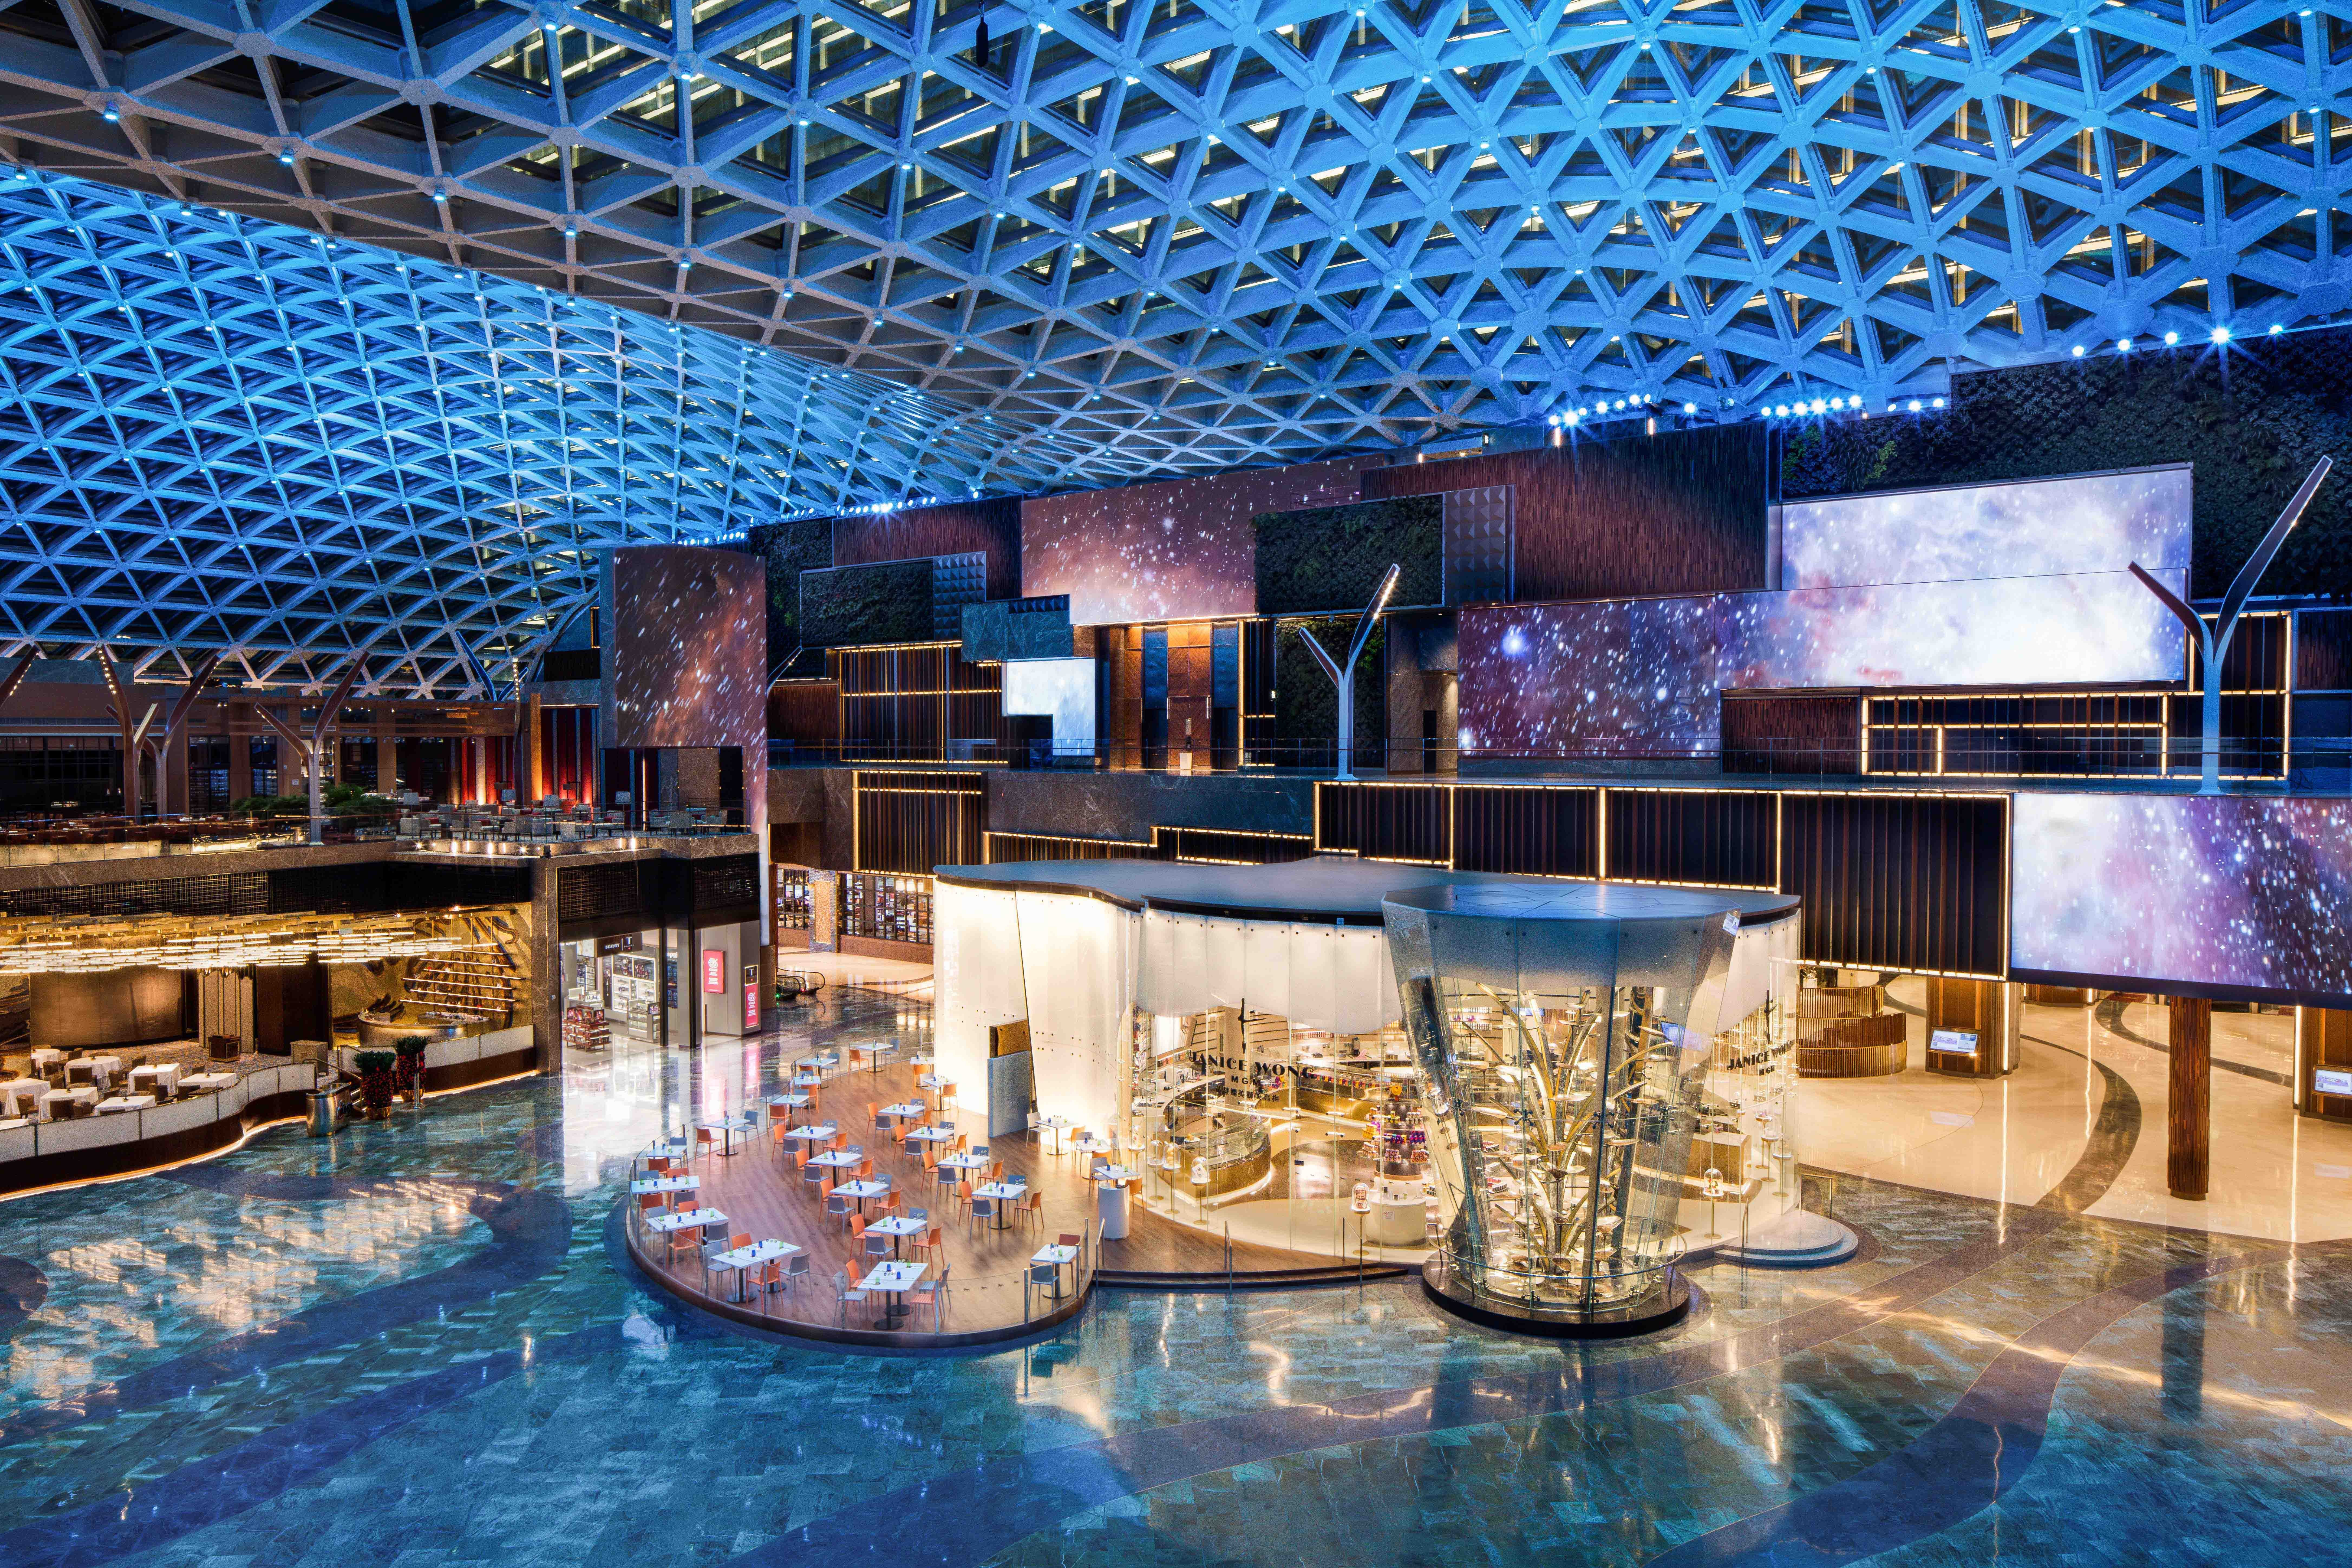 Janice Wong MGM is located in the atrium of the MGM Cotai.